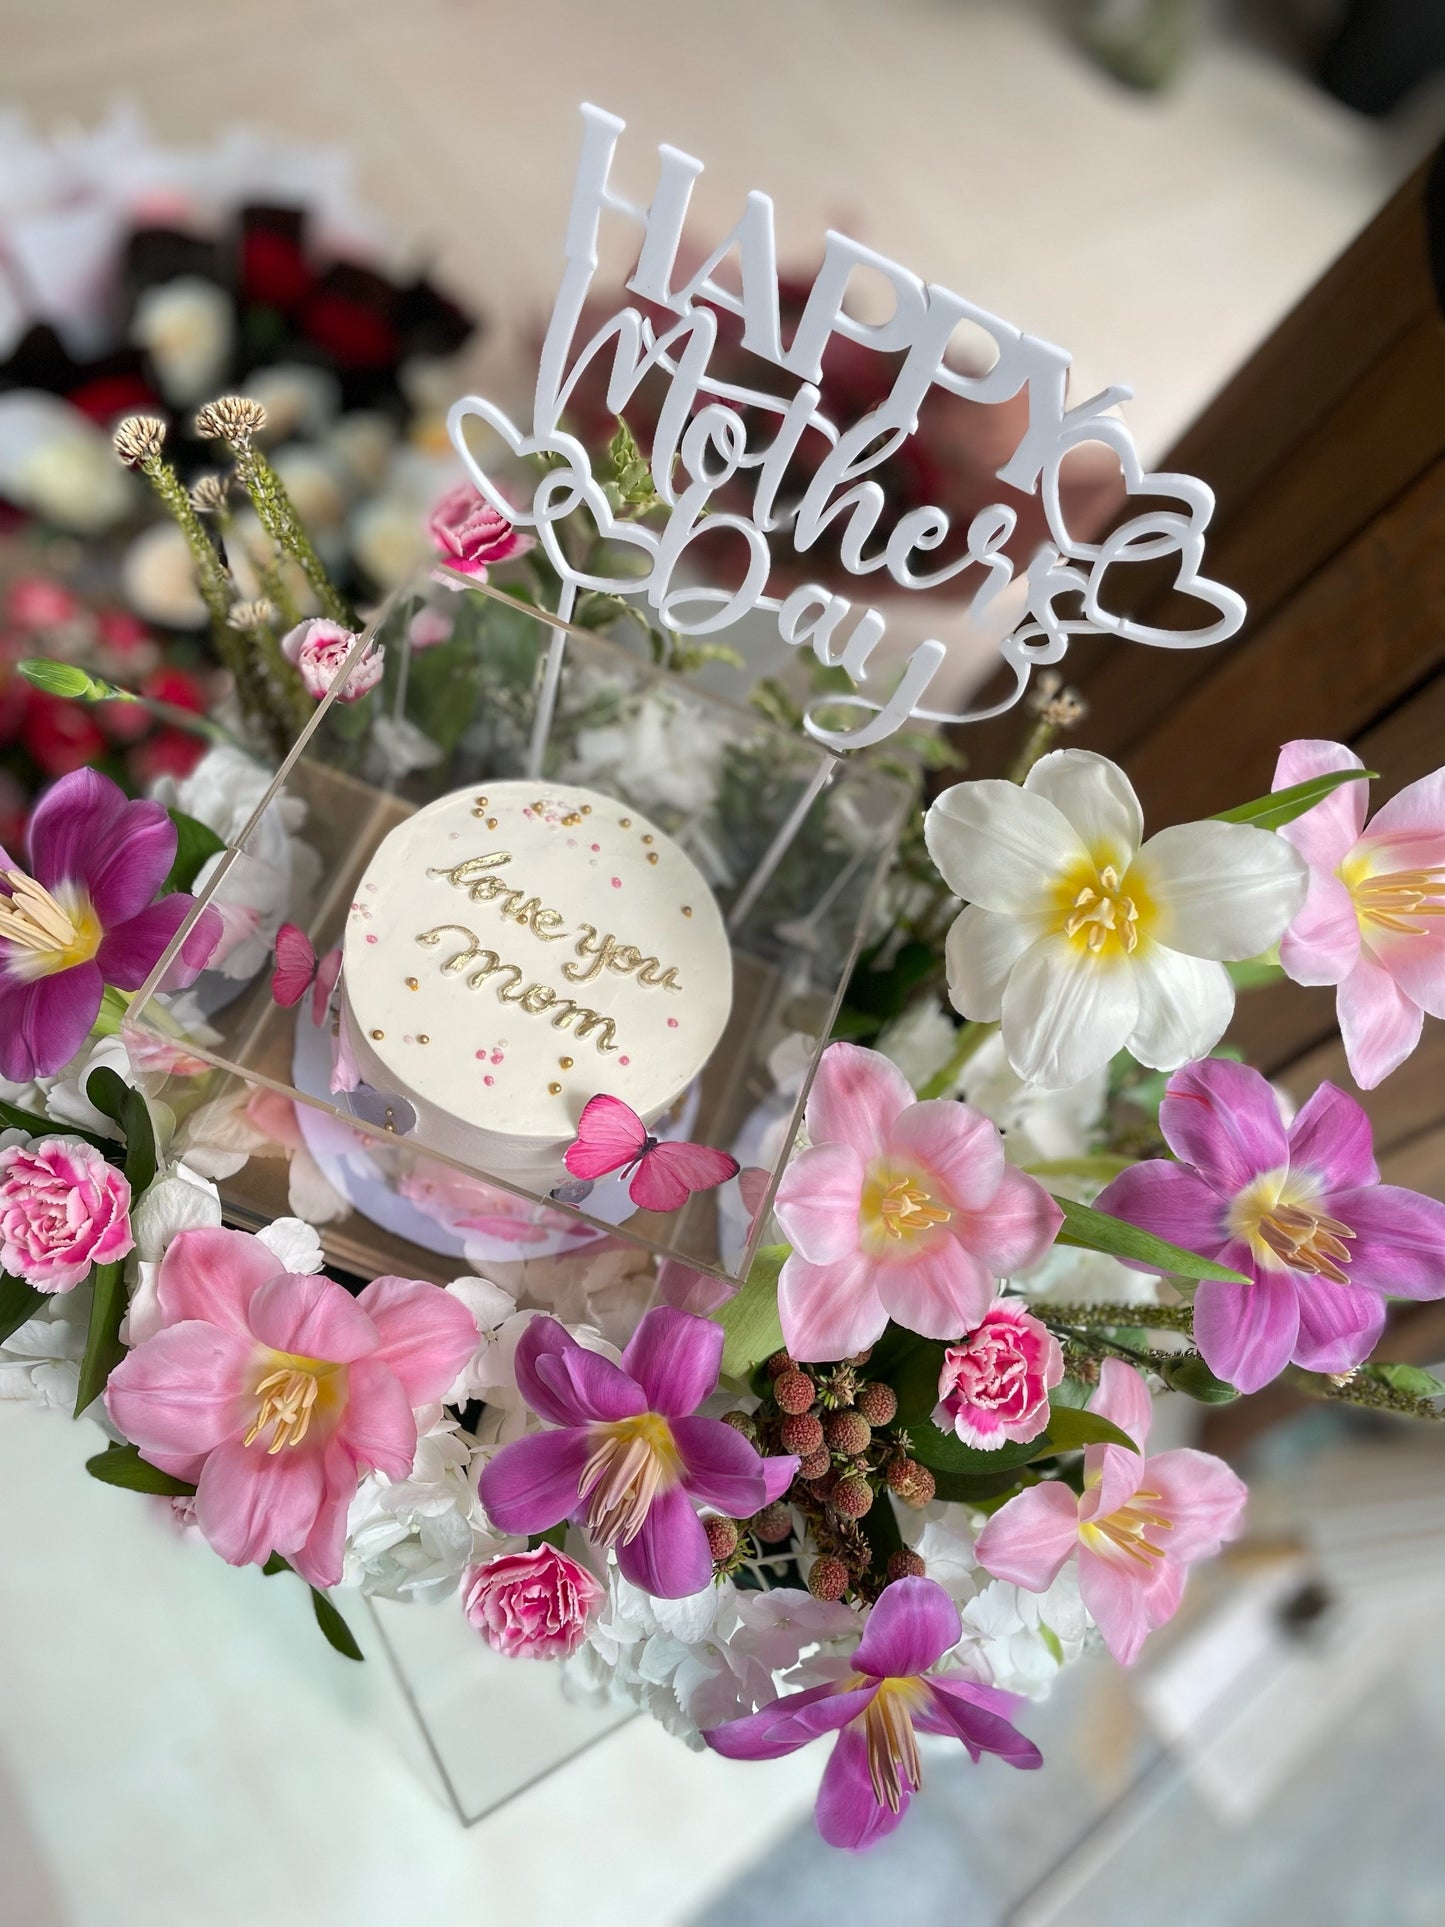 Mother's Day Cake and Blooms